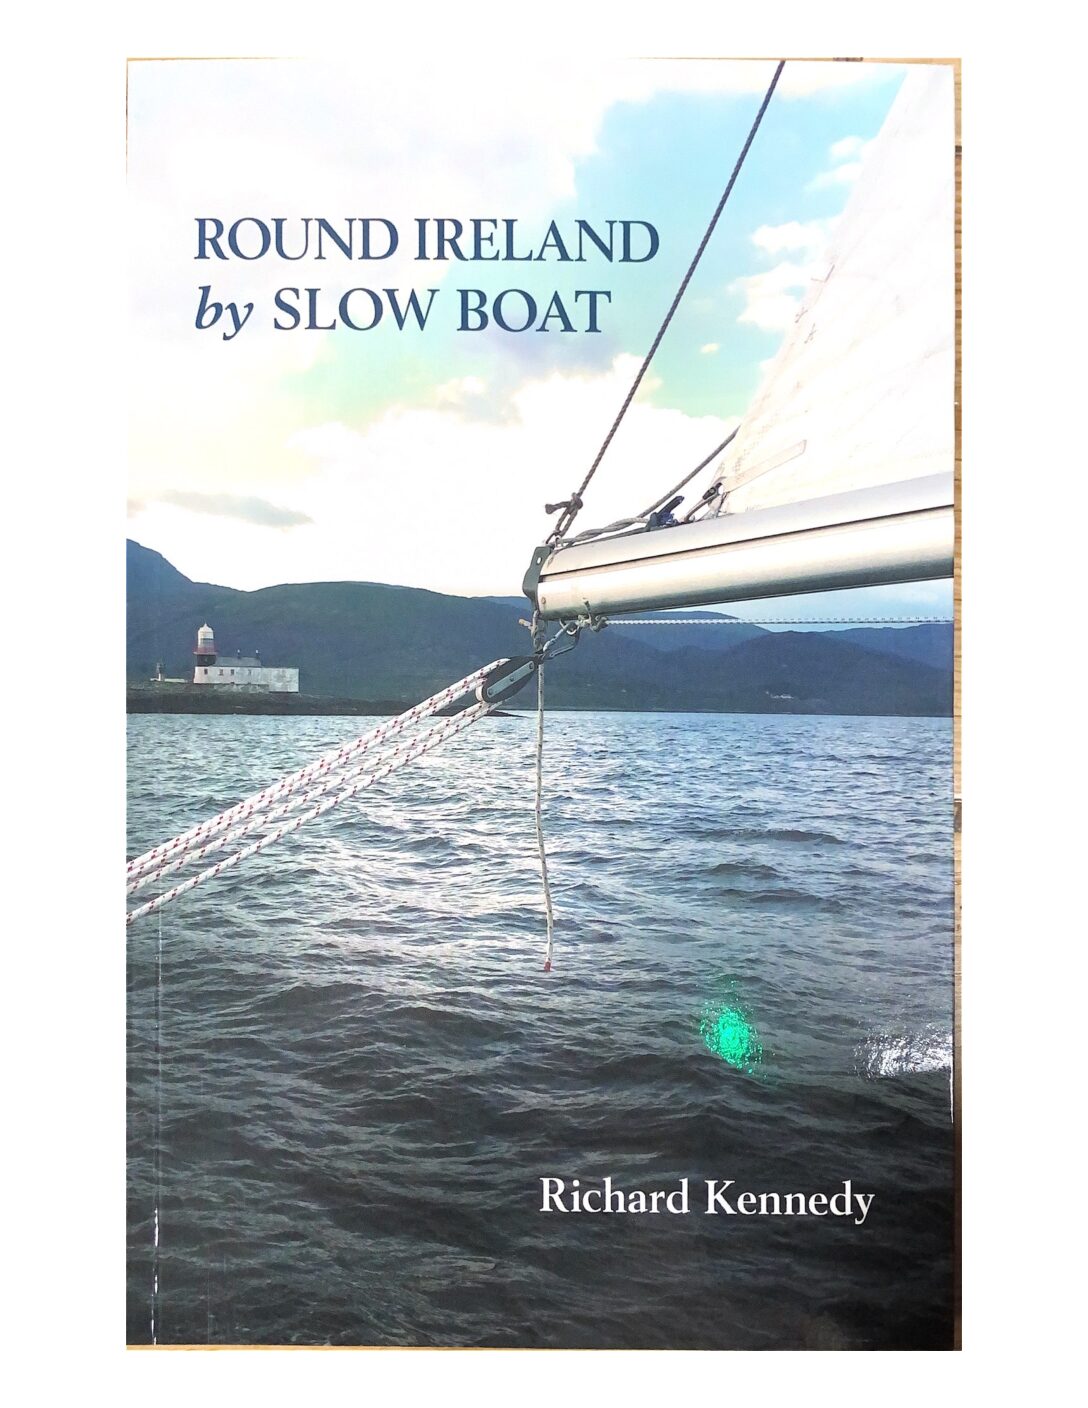 Round Ireland By Slow Boat by Richard Kennedy